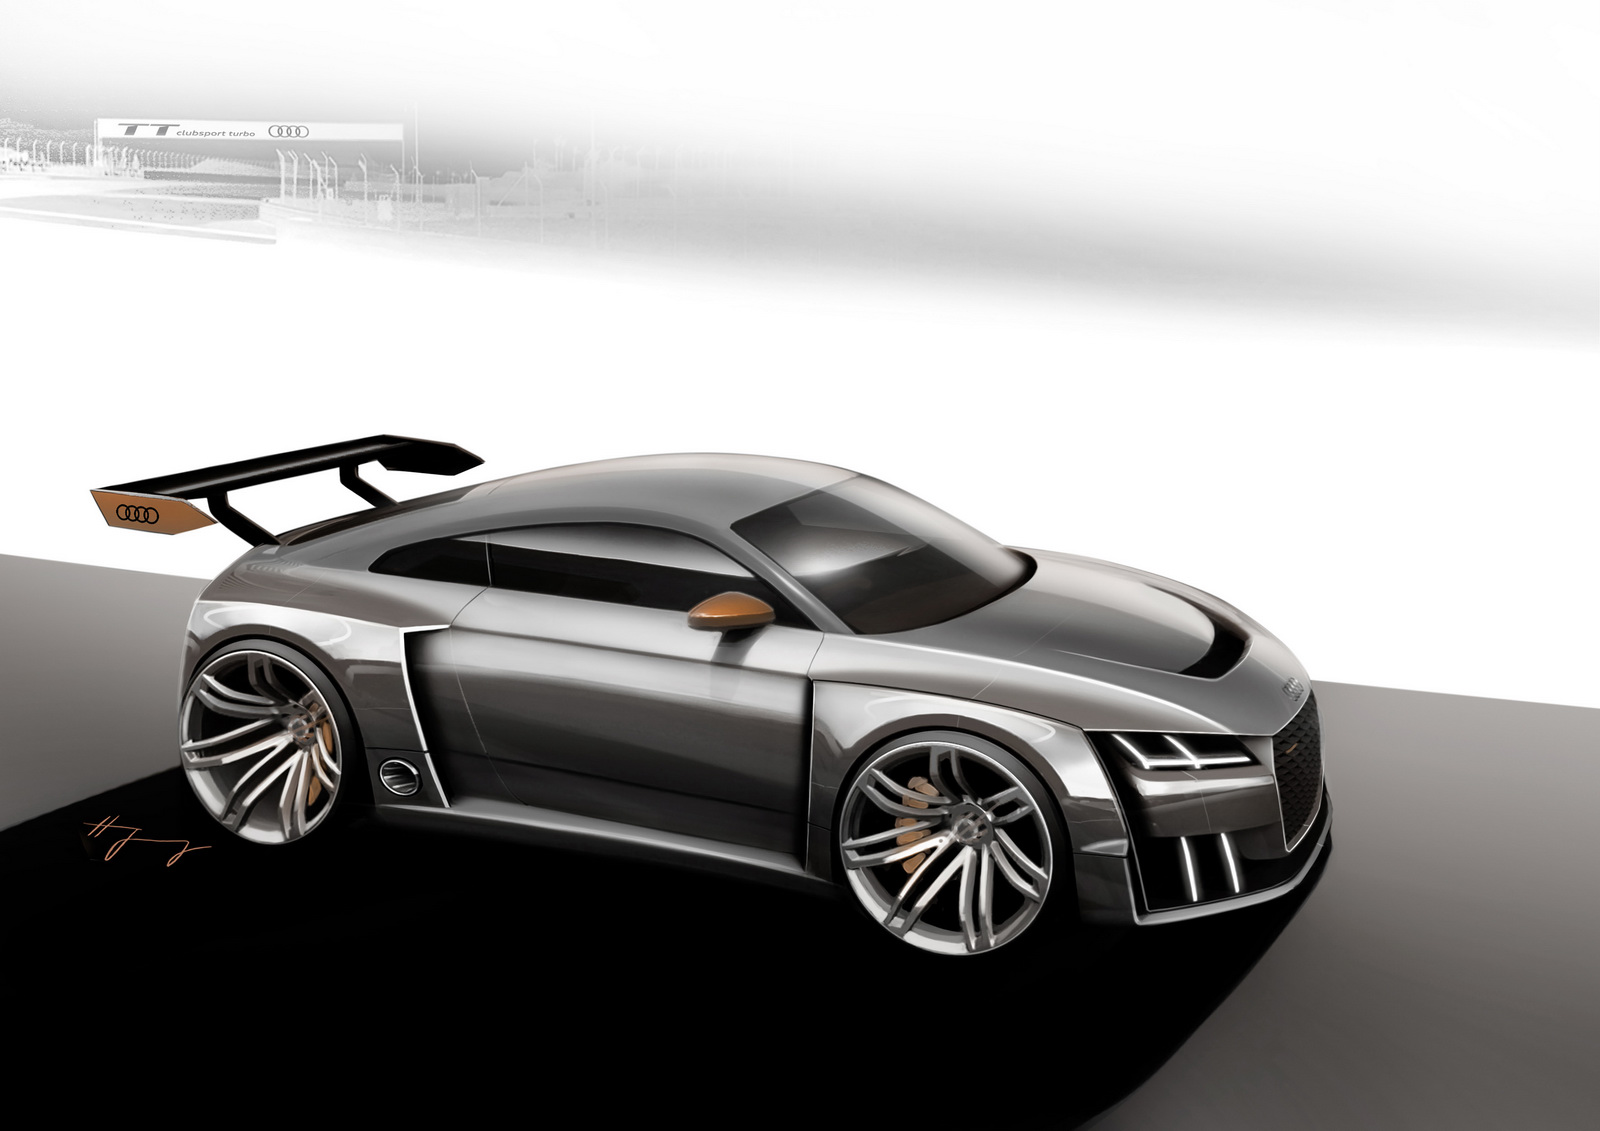 600-HP Audi TT Clubsport Turbo Concept Heads To Wörthersee Tour